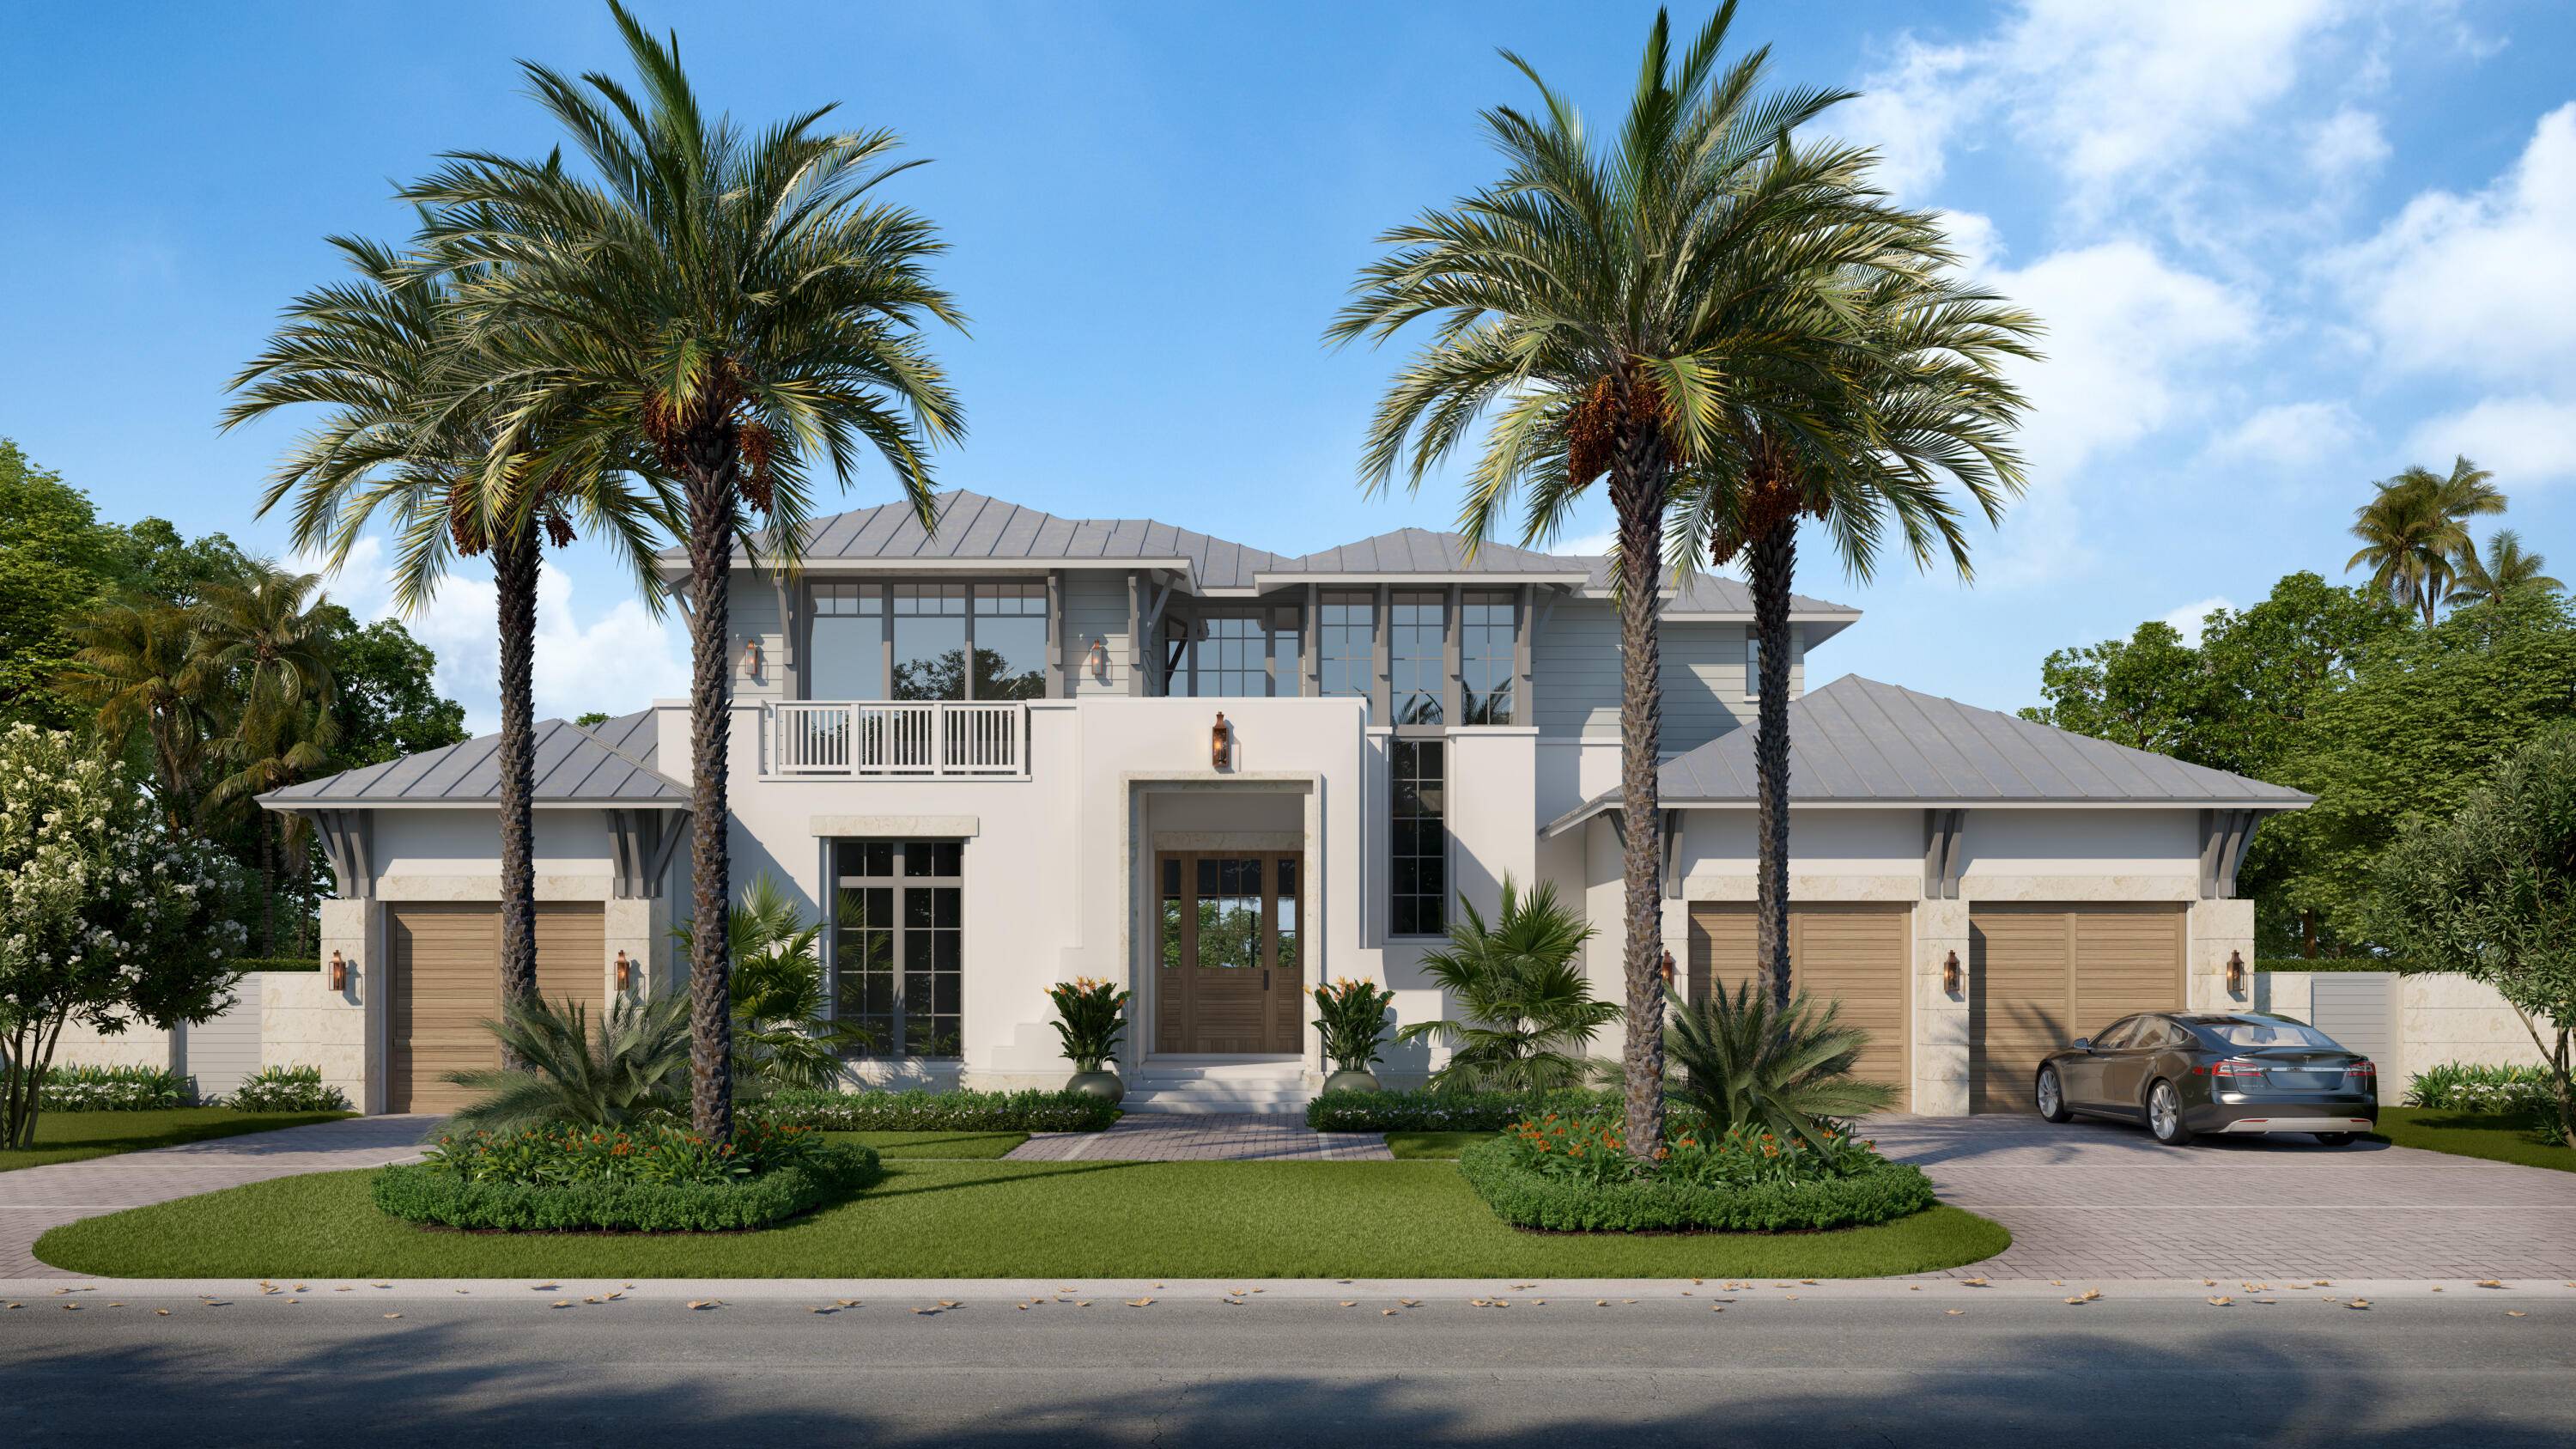 The perfect slice of life is available in Delray Beach, right on the coveted slice of land between the Intracoastal and the Atlantic Ocean.